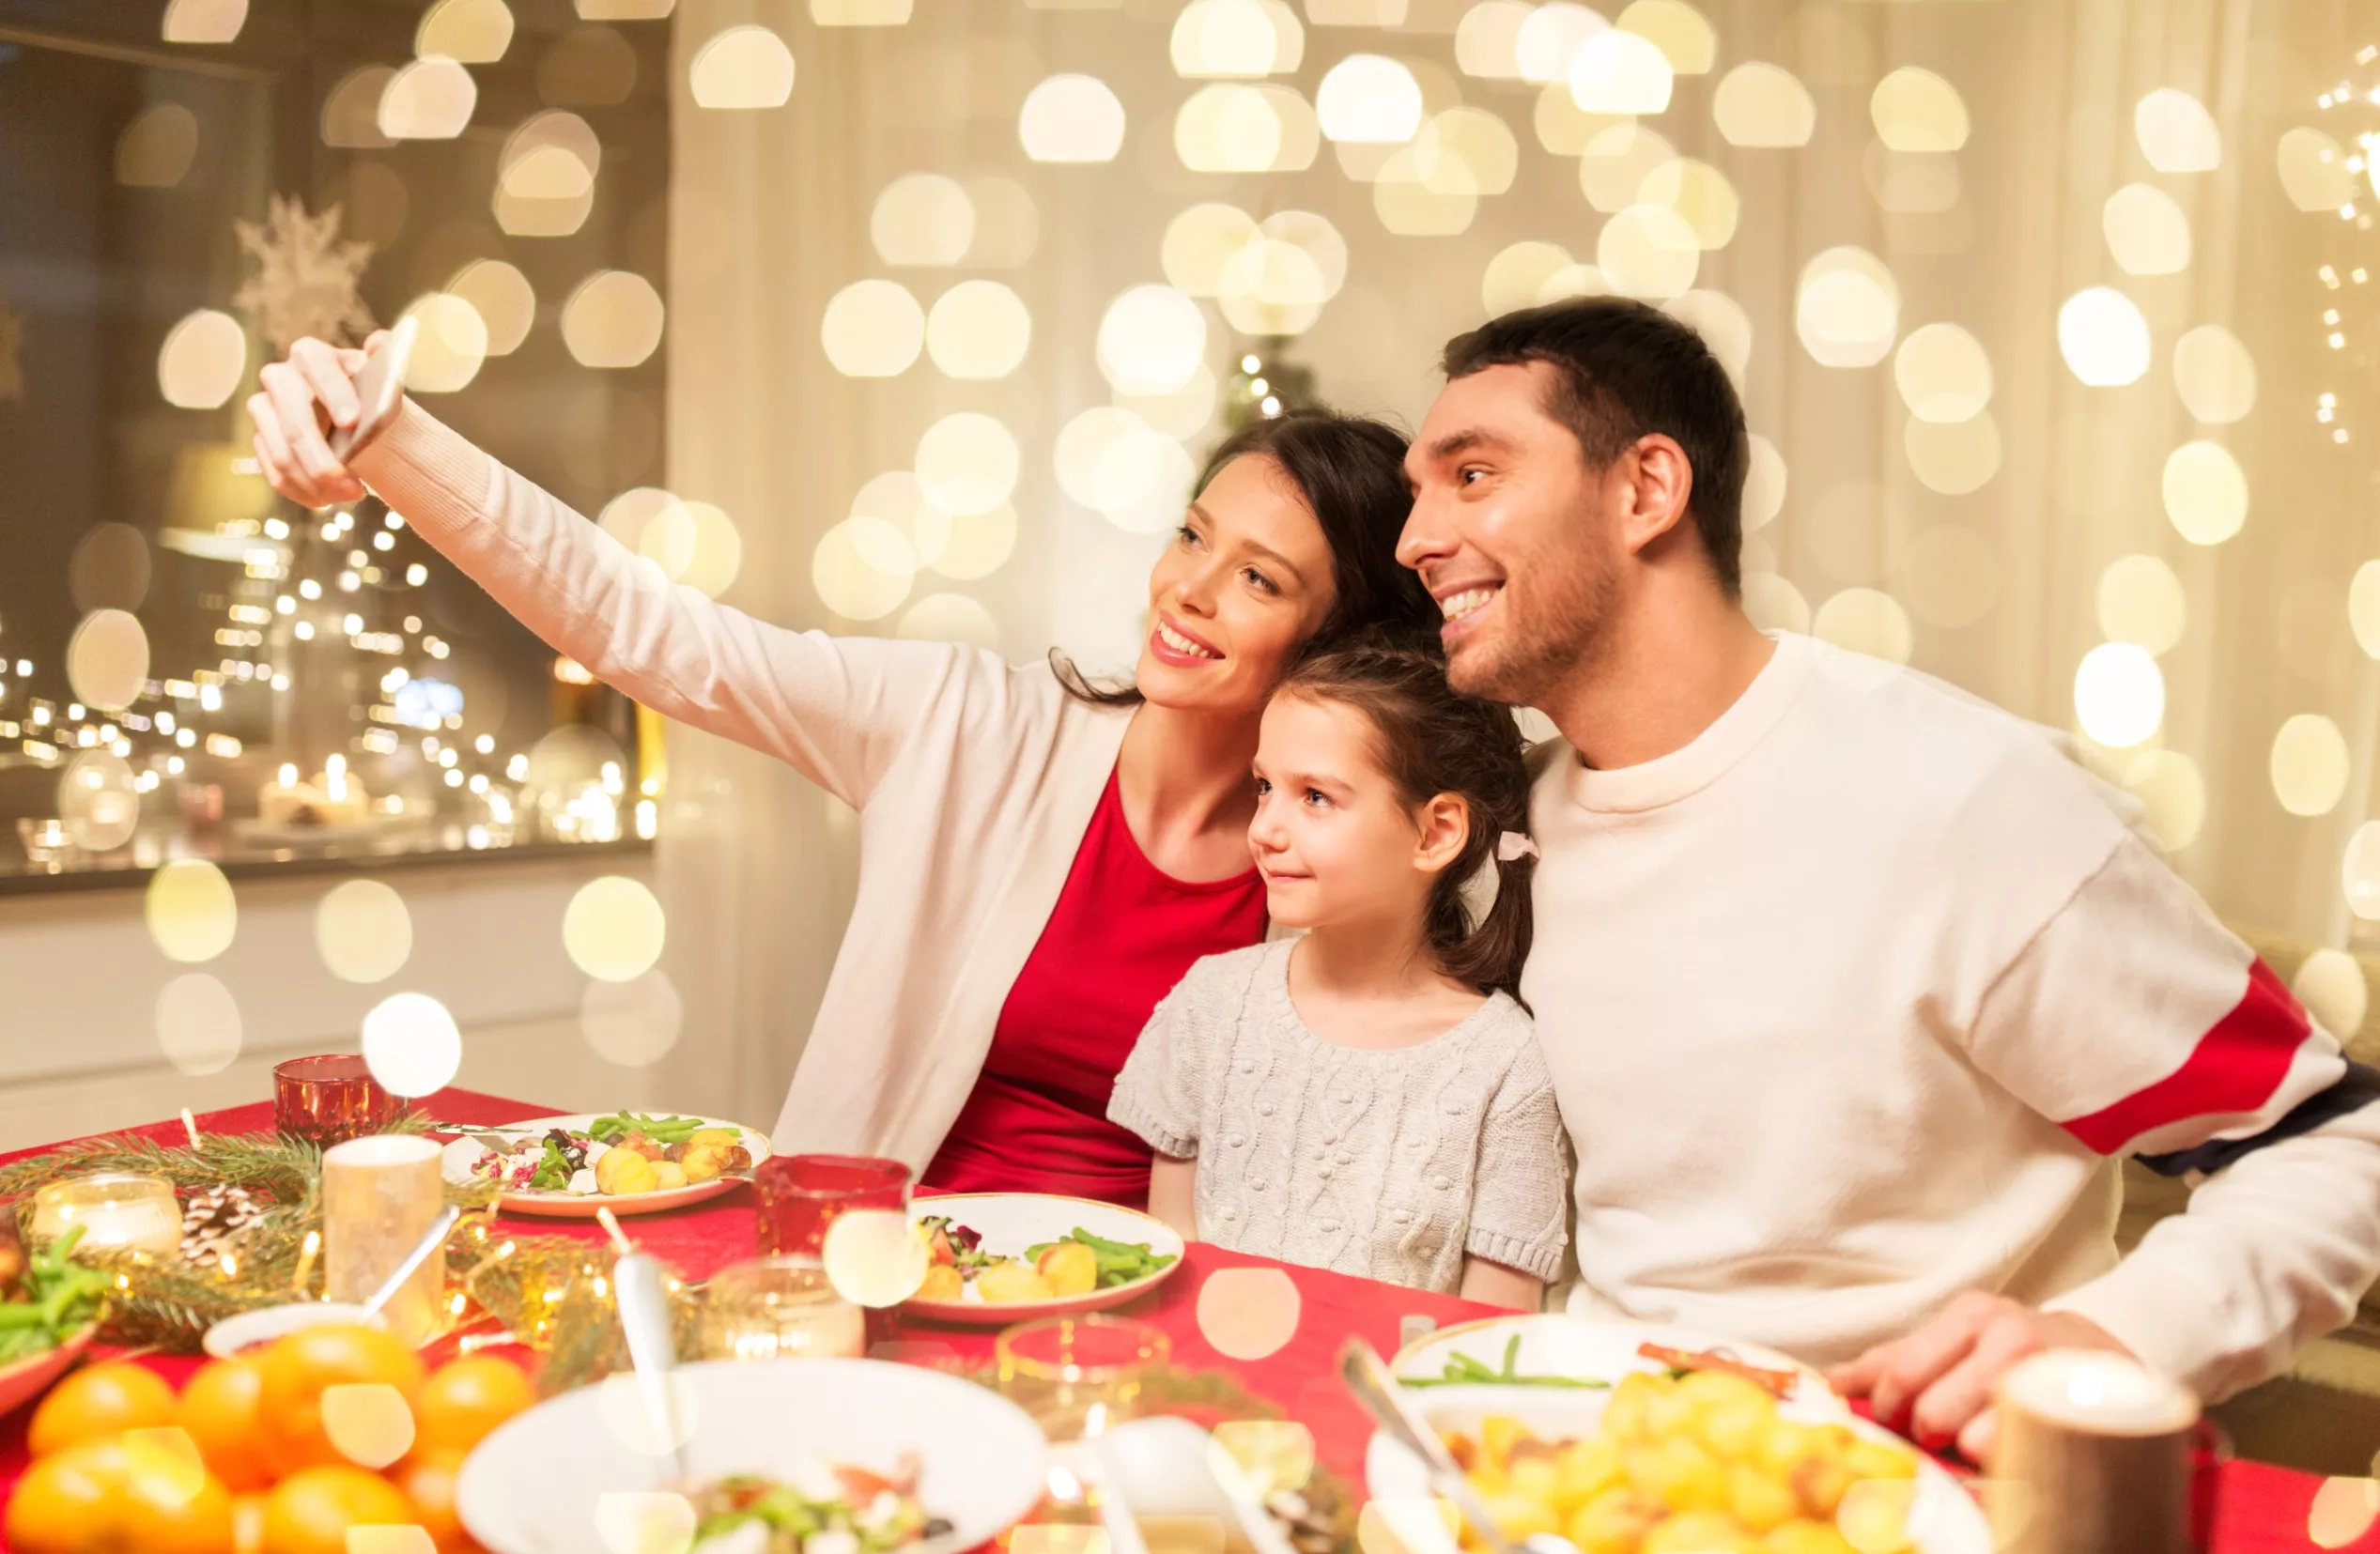 Oral Health During the Holidays